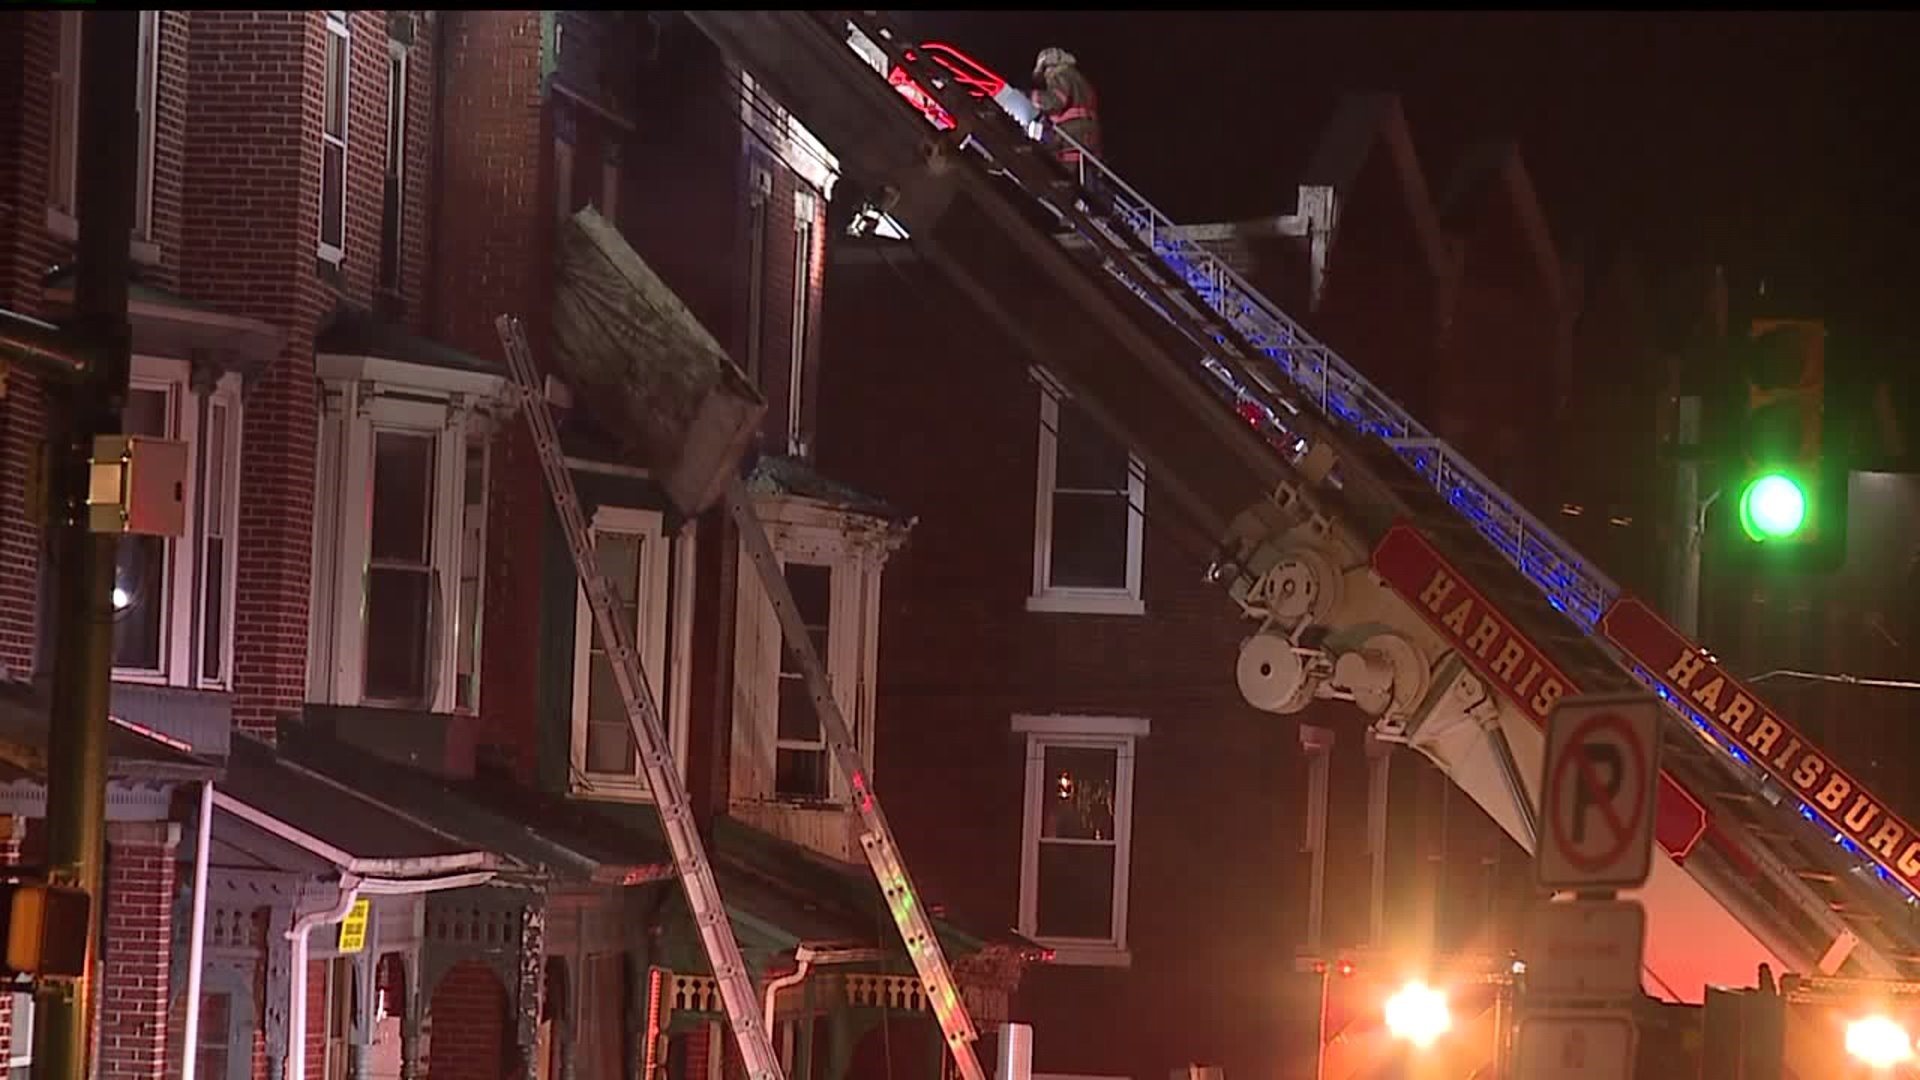 No one injured after Wednesday night fire in Harrisburg